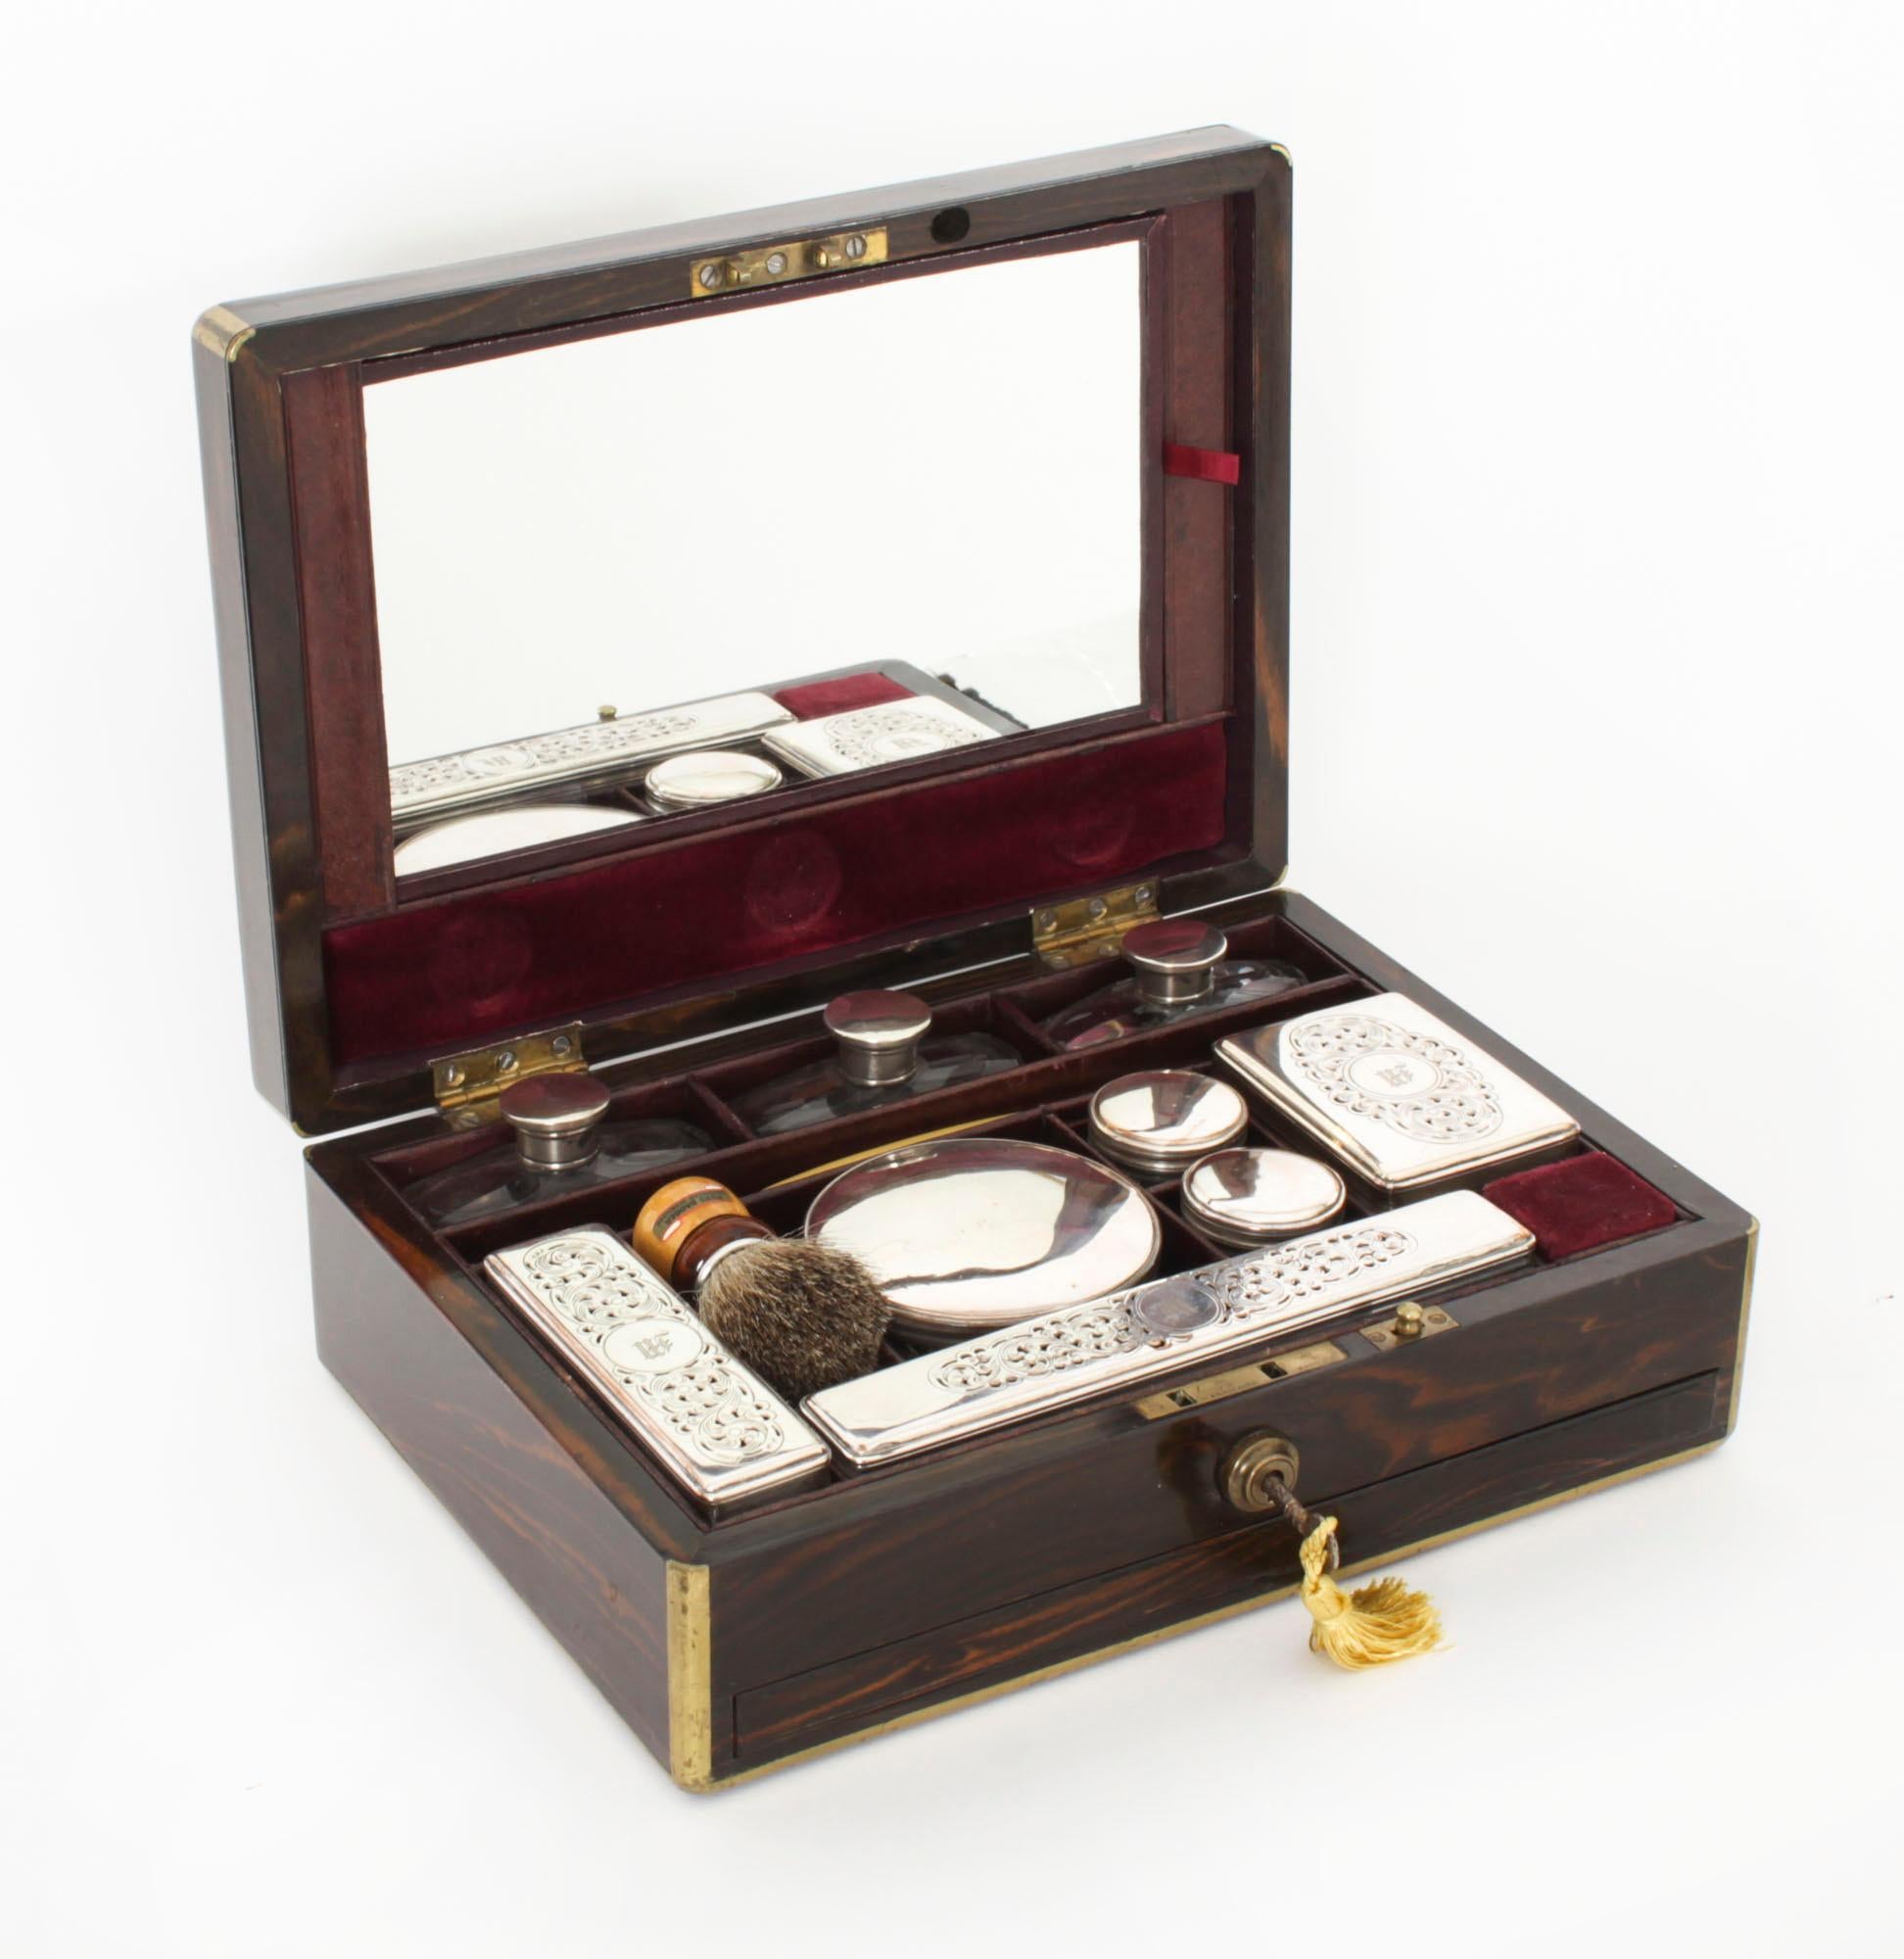 This is a stunning antique Victorian Coromandel gentleman's travelling vanity case with fitted interior, circa 1865 in date.

This rectagular shaped traveling case is made of rare coromandel wood and features a blank brass plaque. The interior is